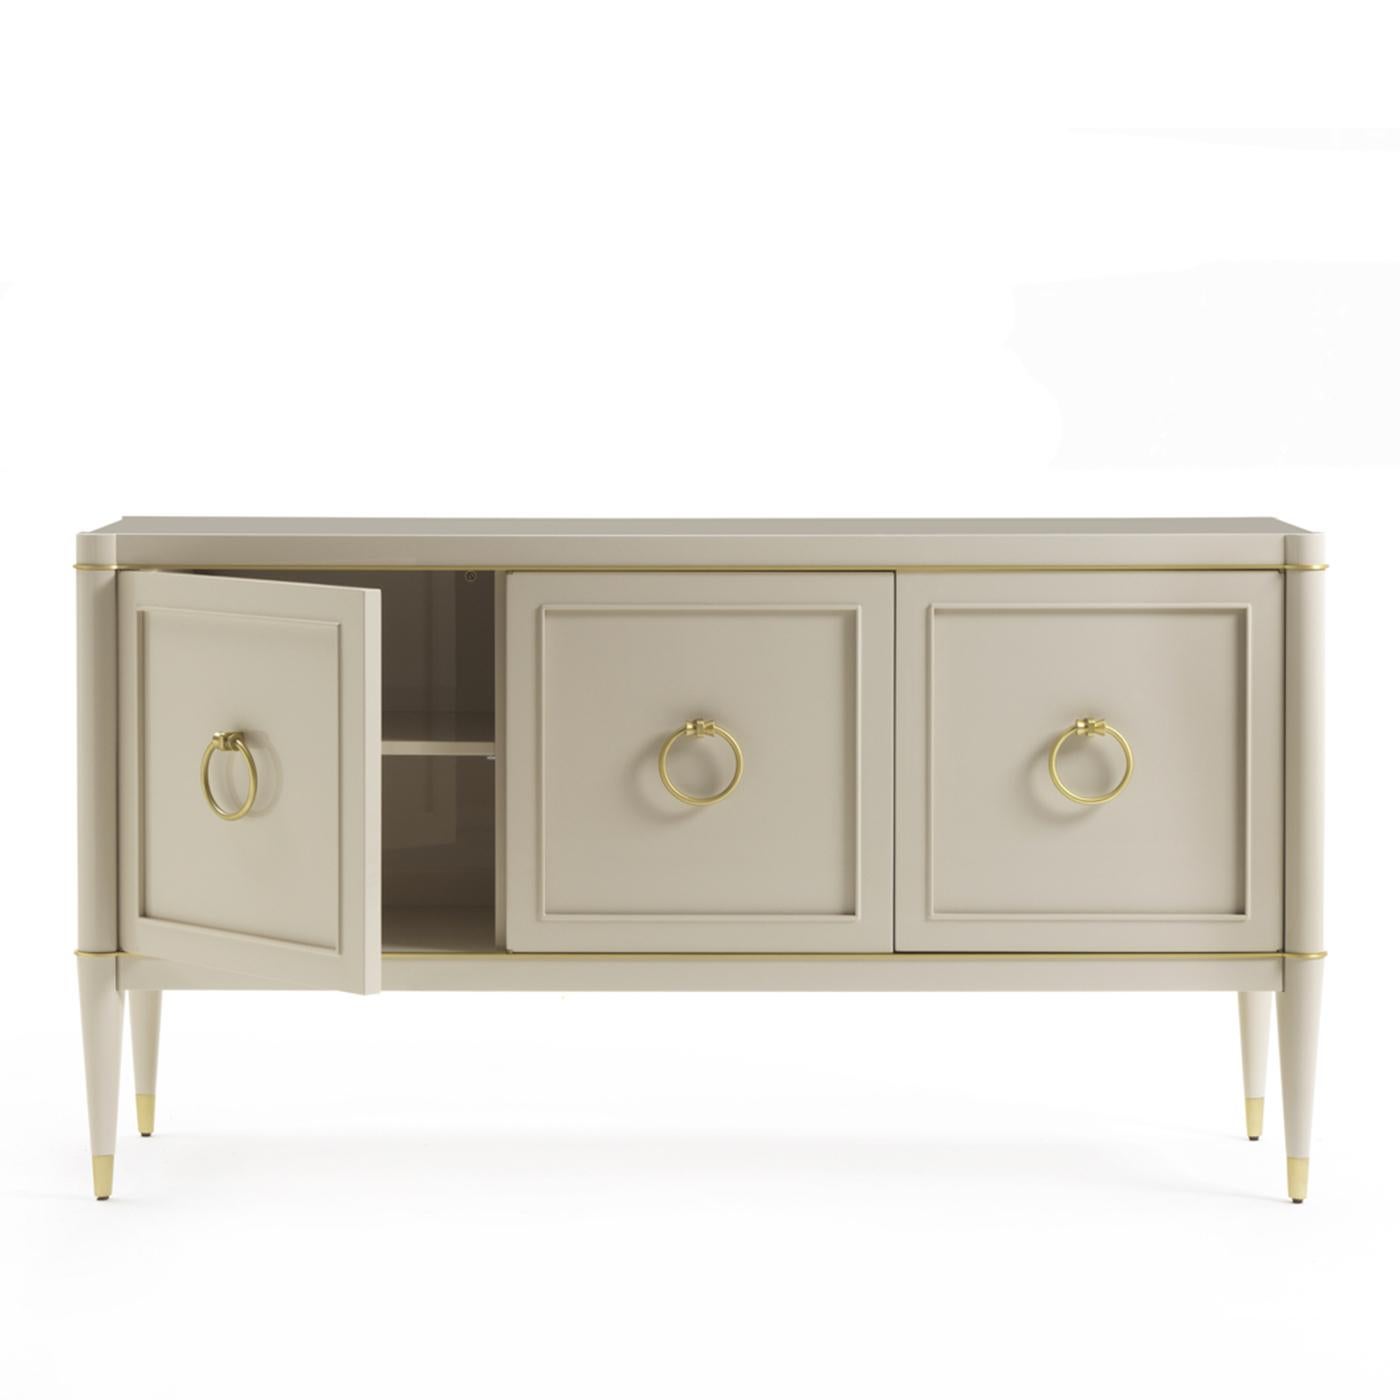 Part of the Ambra collection of elegant cabinets, this sideboard is a precious addition to a living room or dining room, where its exquisite silhouette will decorate a wall with subtle sophistication, while providing ample storage space and display